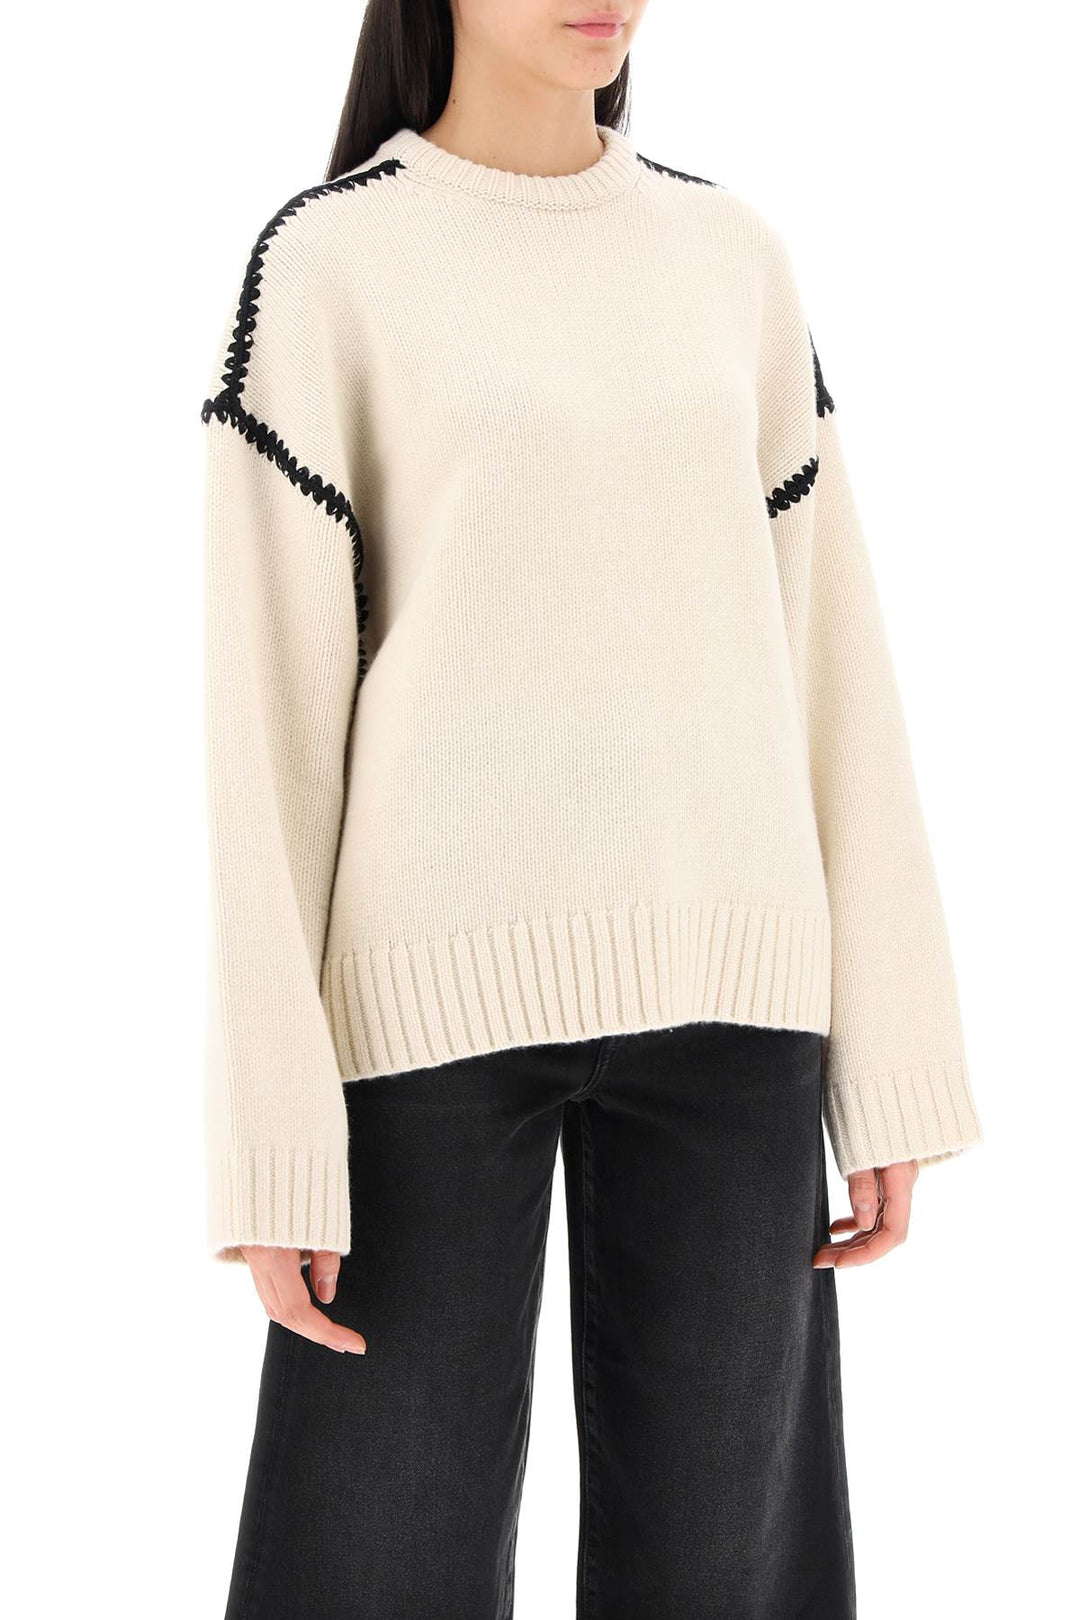 Toteme Sweater With Contrast Embroideries   Neutral